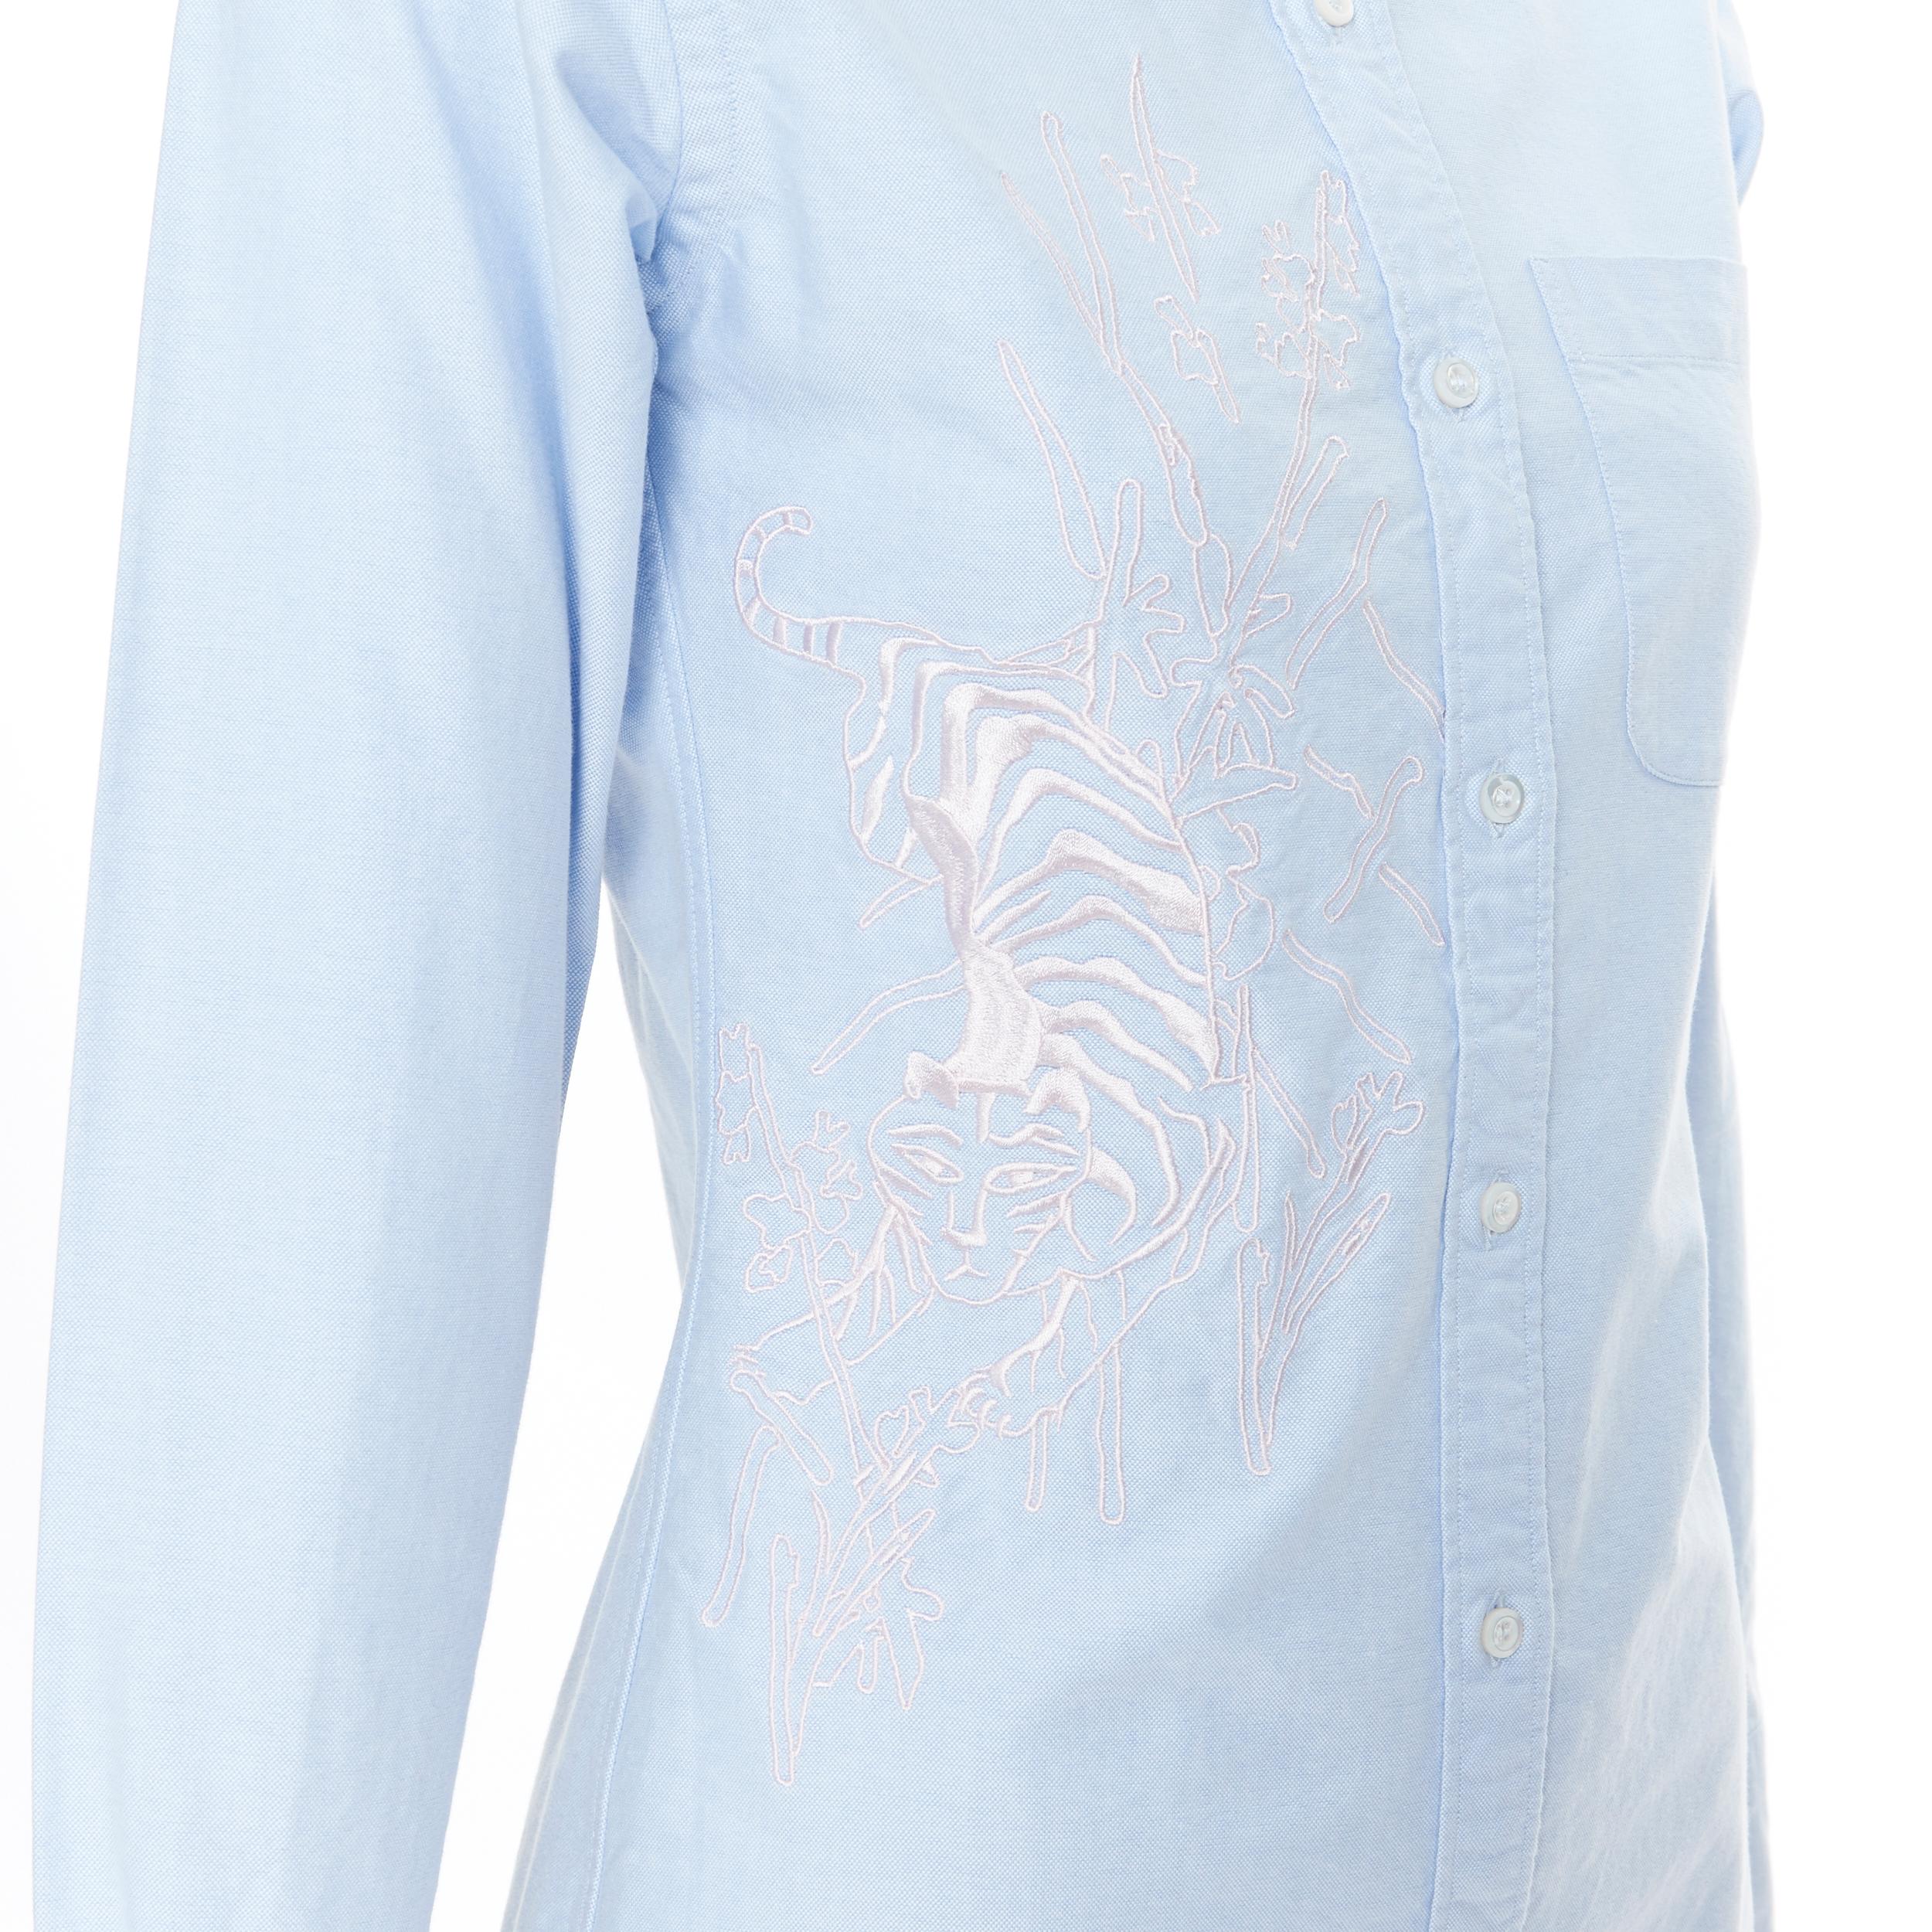 THOM BROWNE light blut cotton pink tiget embroidery slim fit shirt IT38 XS
Brand: Thom Browne
Designer: Thom Browne
Model Name / Style: Slim fit shirt
Material: Cotton
Color: Blue
Pattern: Solid
Closure: Button
Extra Detail: Pink thread tiger